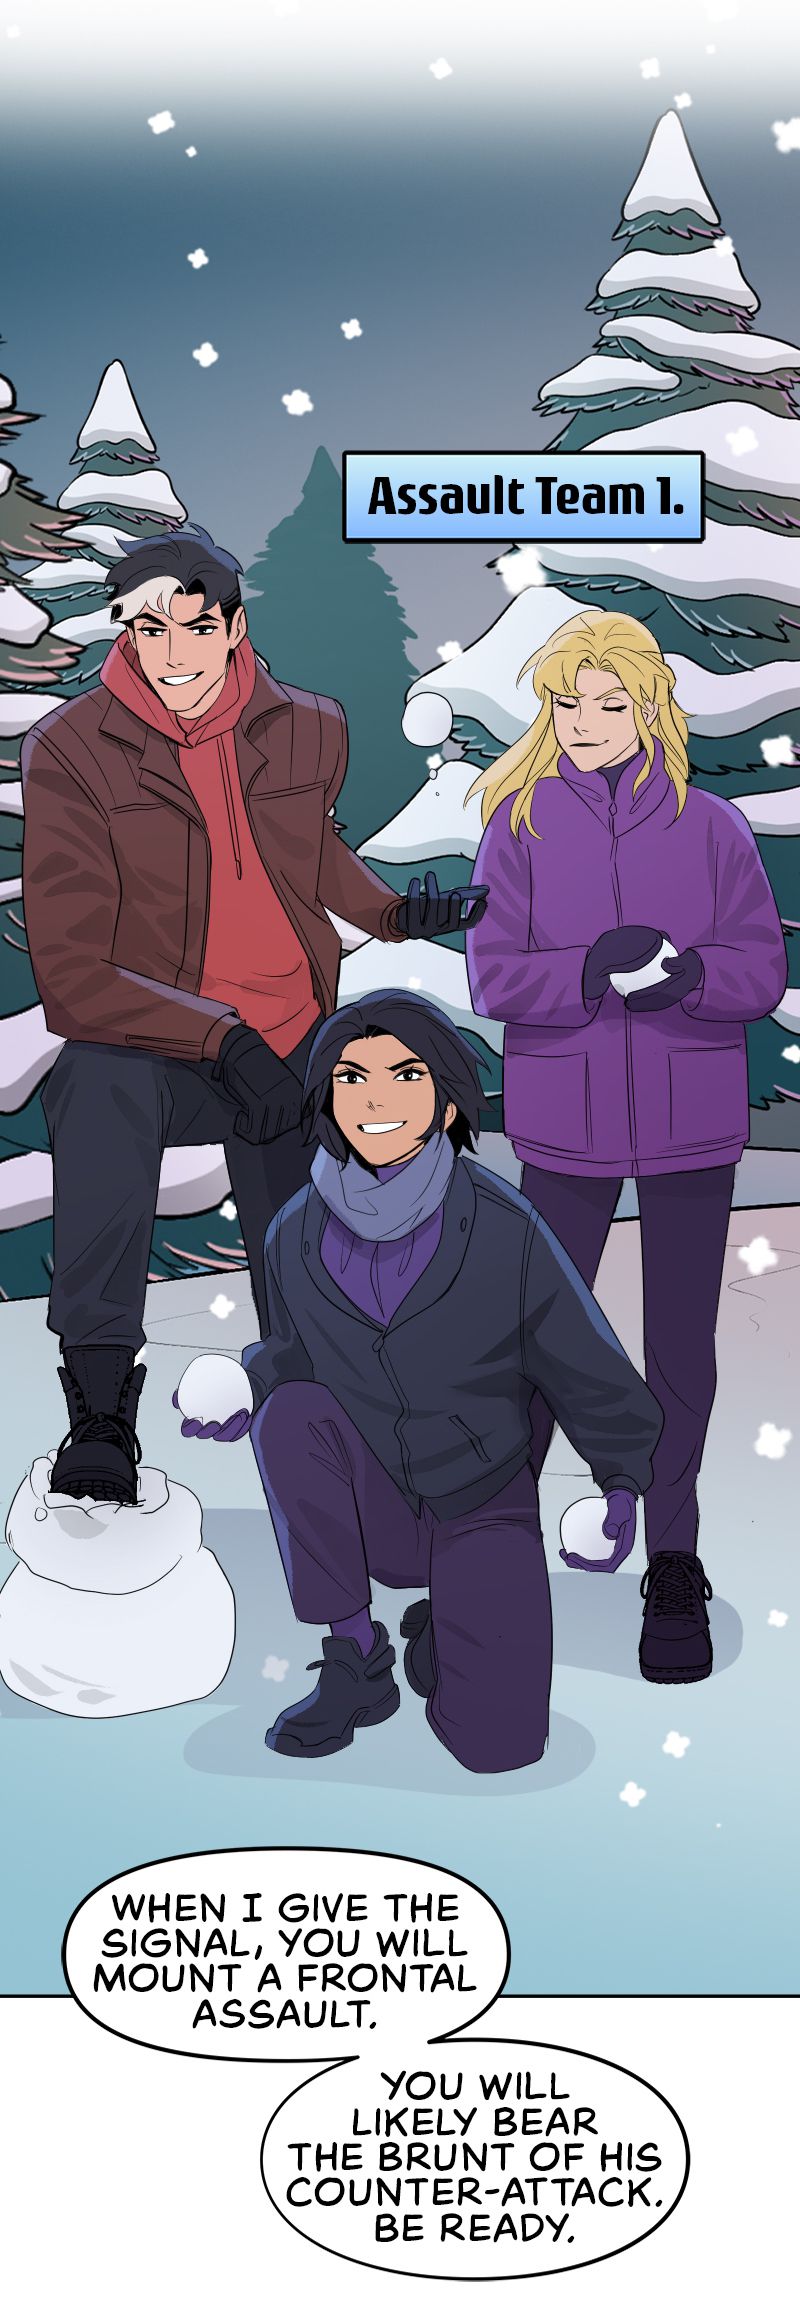 Tim Drake discusses snowball fight tactics with Red Hood, Stephanie Brown and Cassandra Cain in Batman: Wayne Family Adventures.